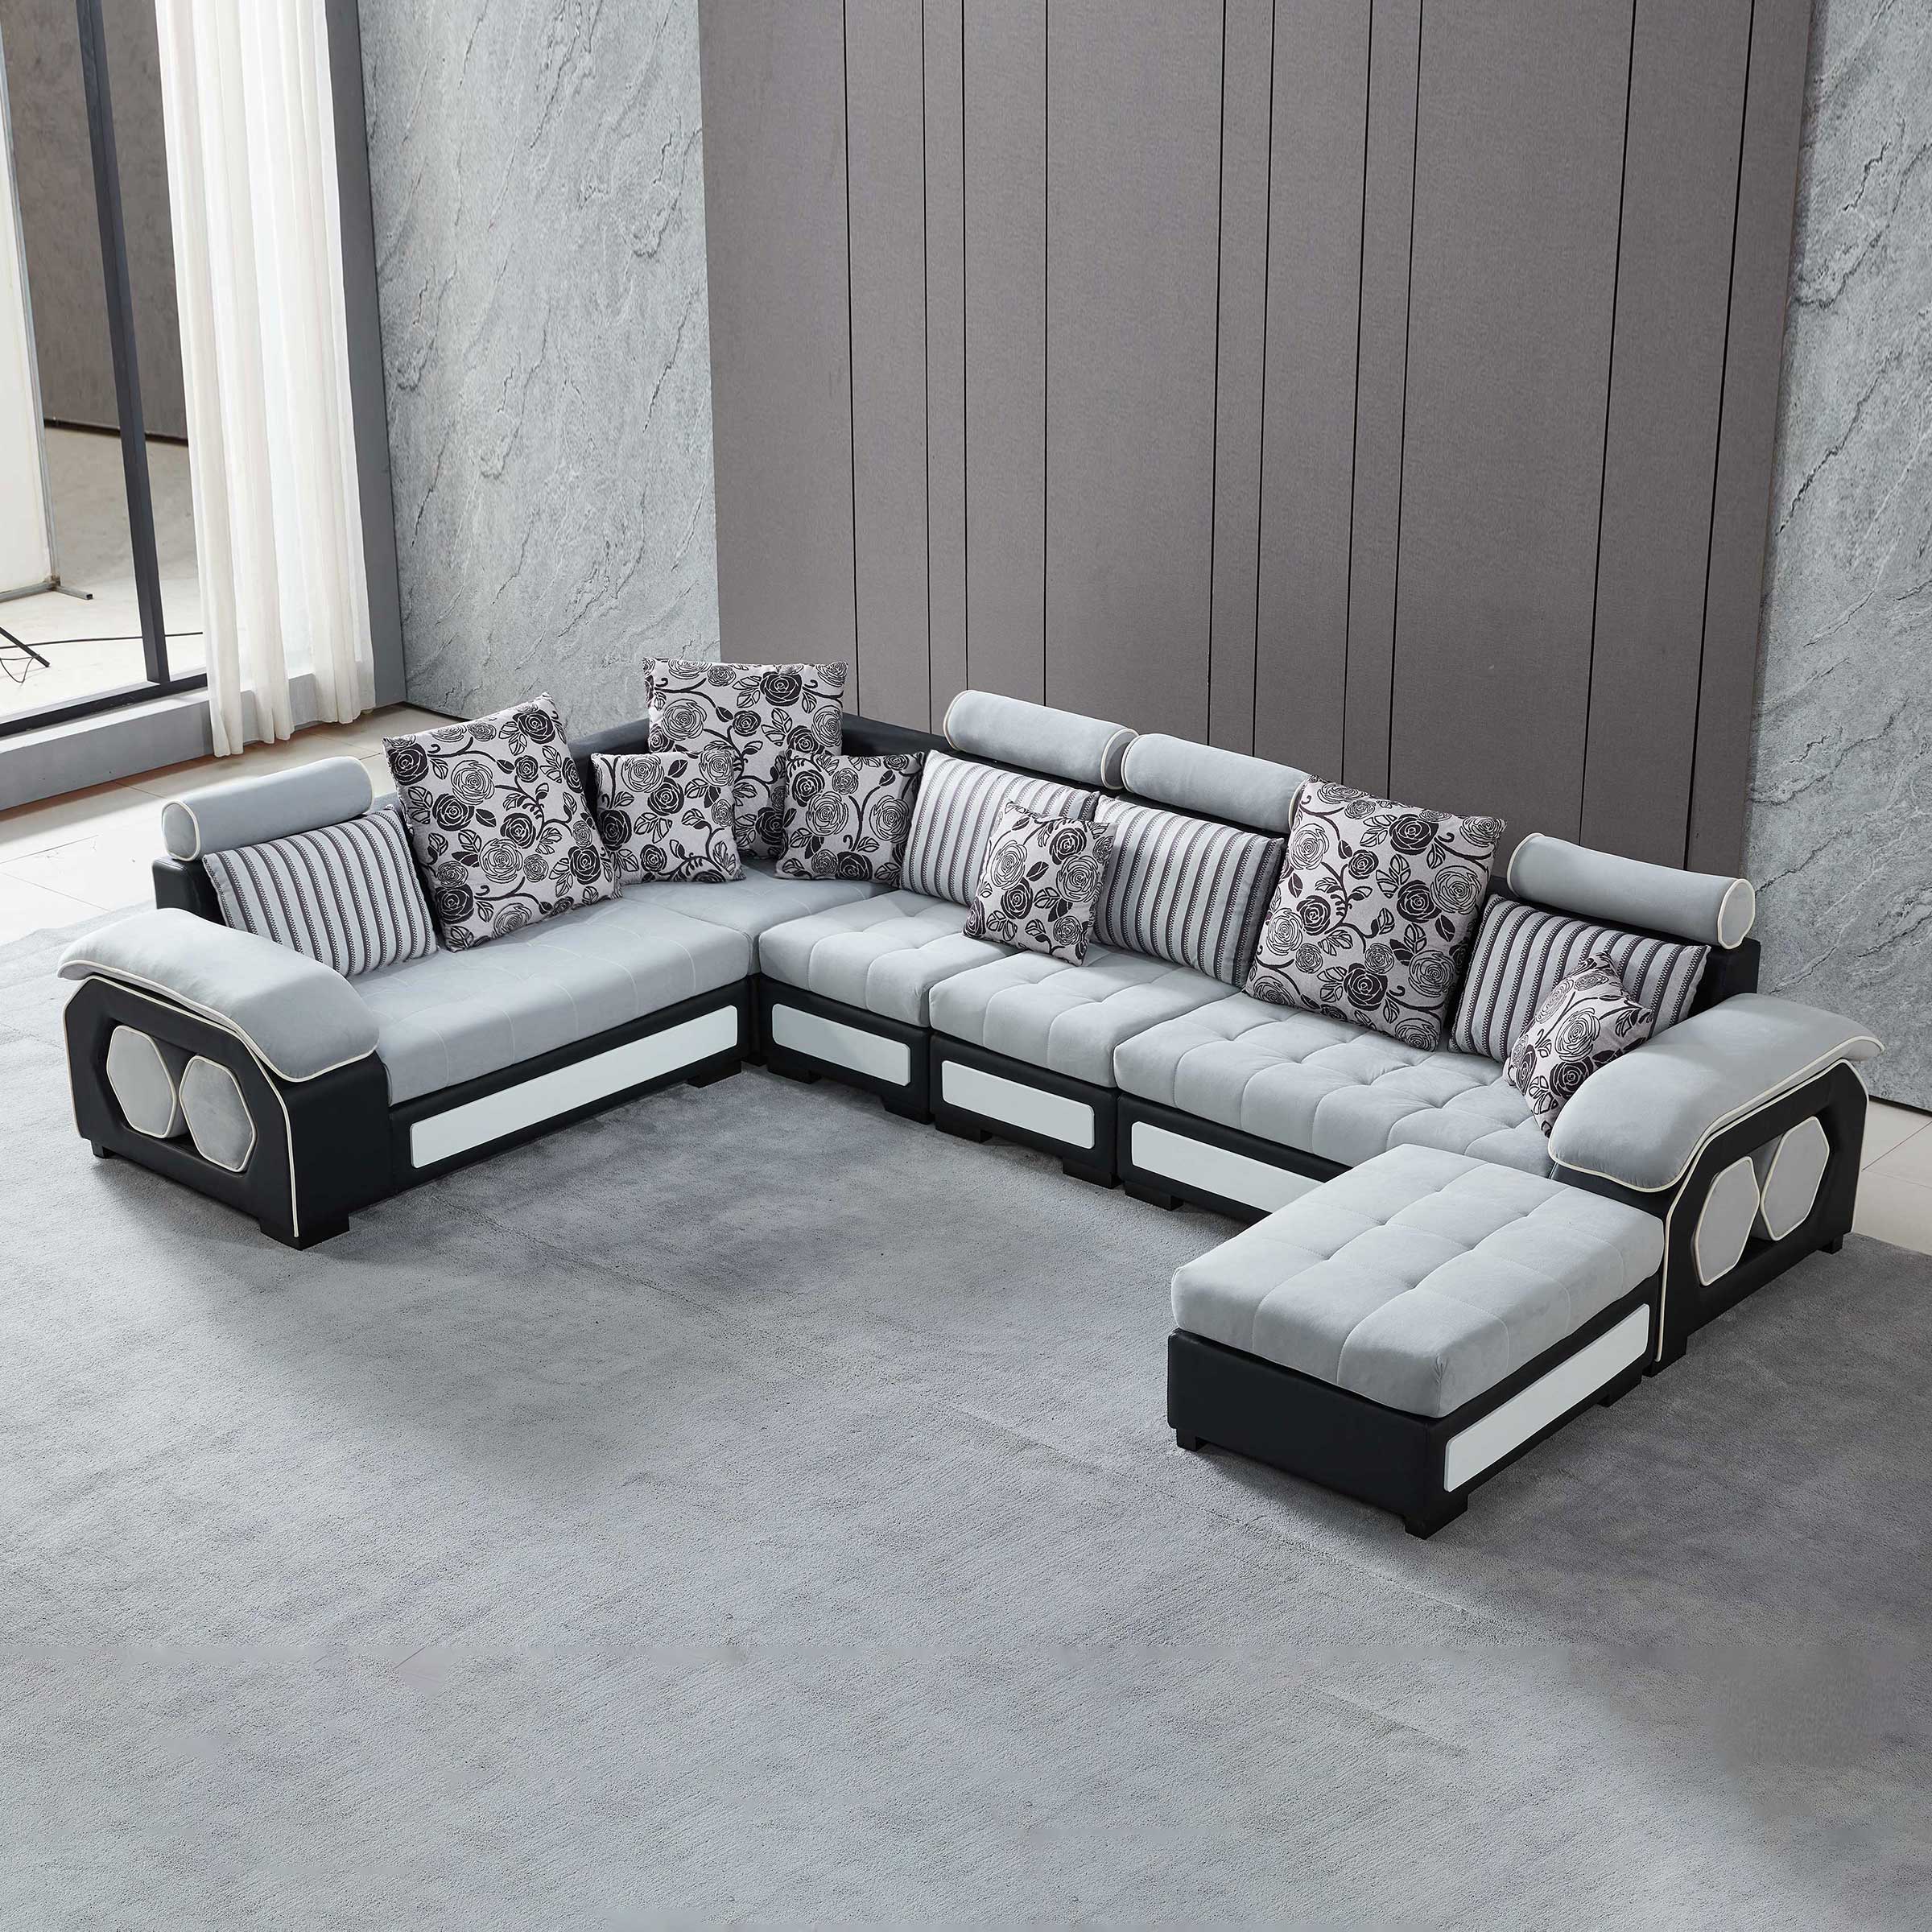 Orion Classic Modular Tufted Sectional